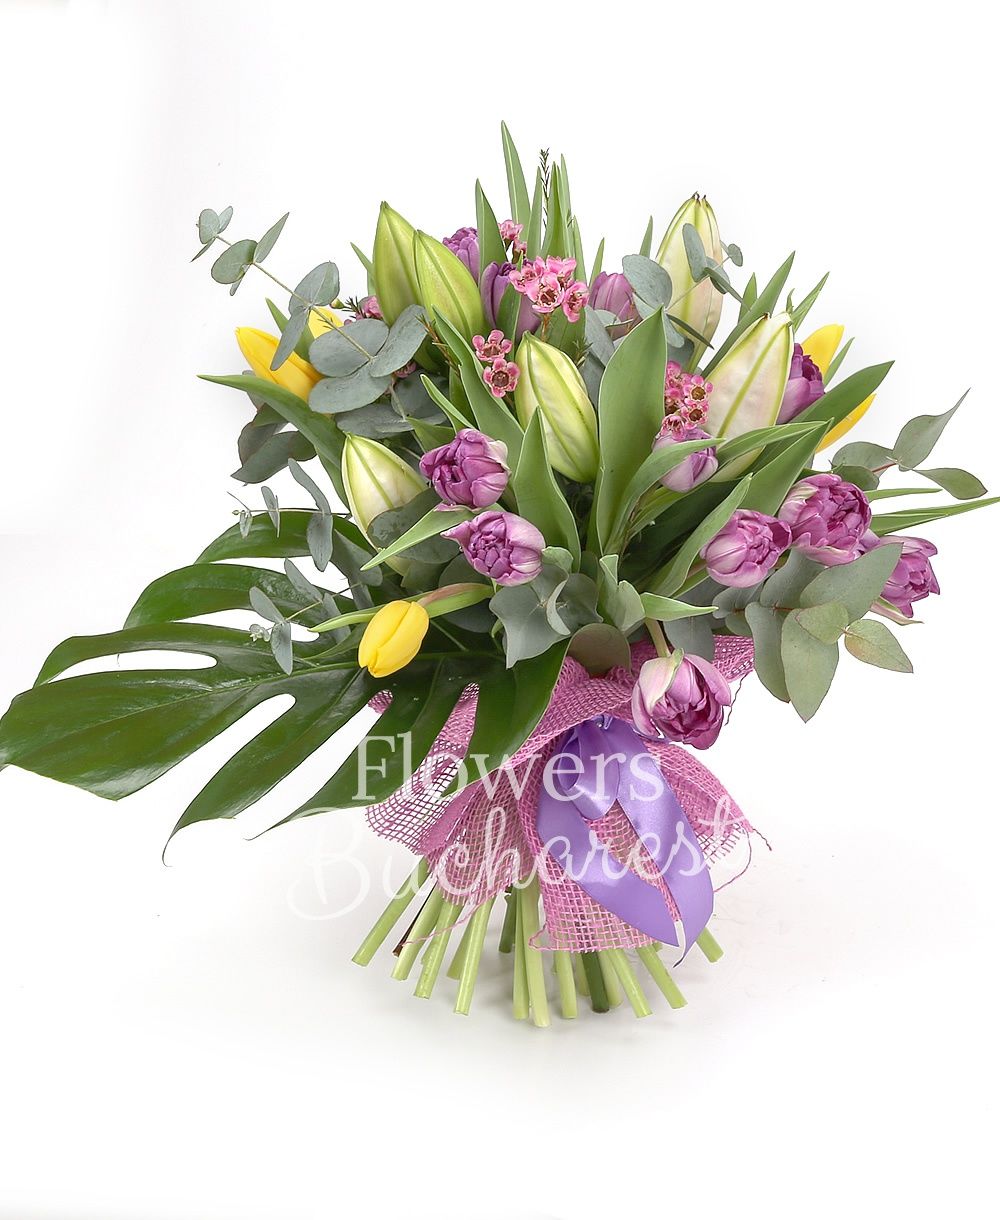 2 imperial pink lilies, 10 yellow tulips, 15 purple tulips, 2 pink waxflowers, greenery